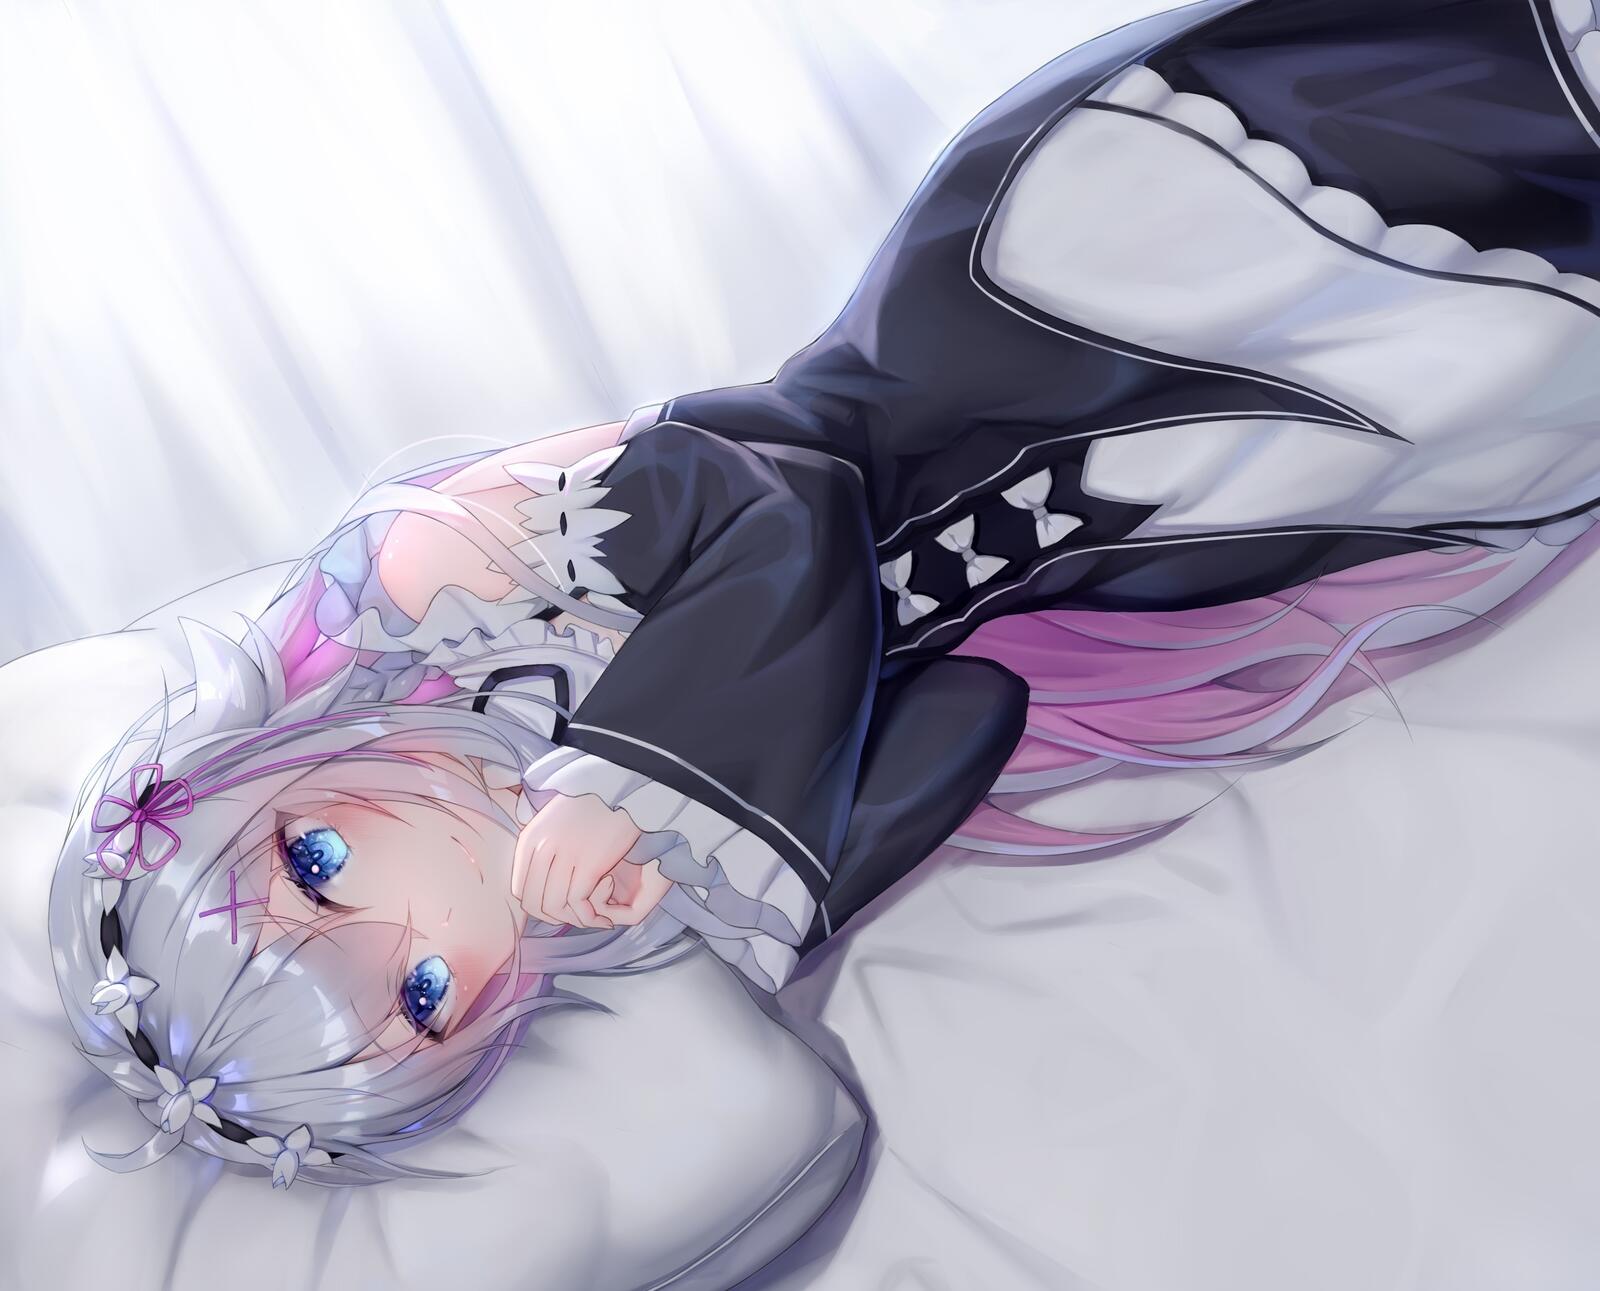 Wallpapers wallpaper rem lying maid outfit on the desktop